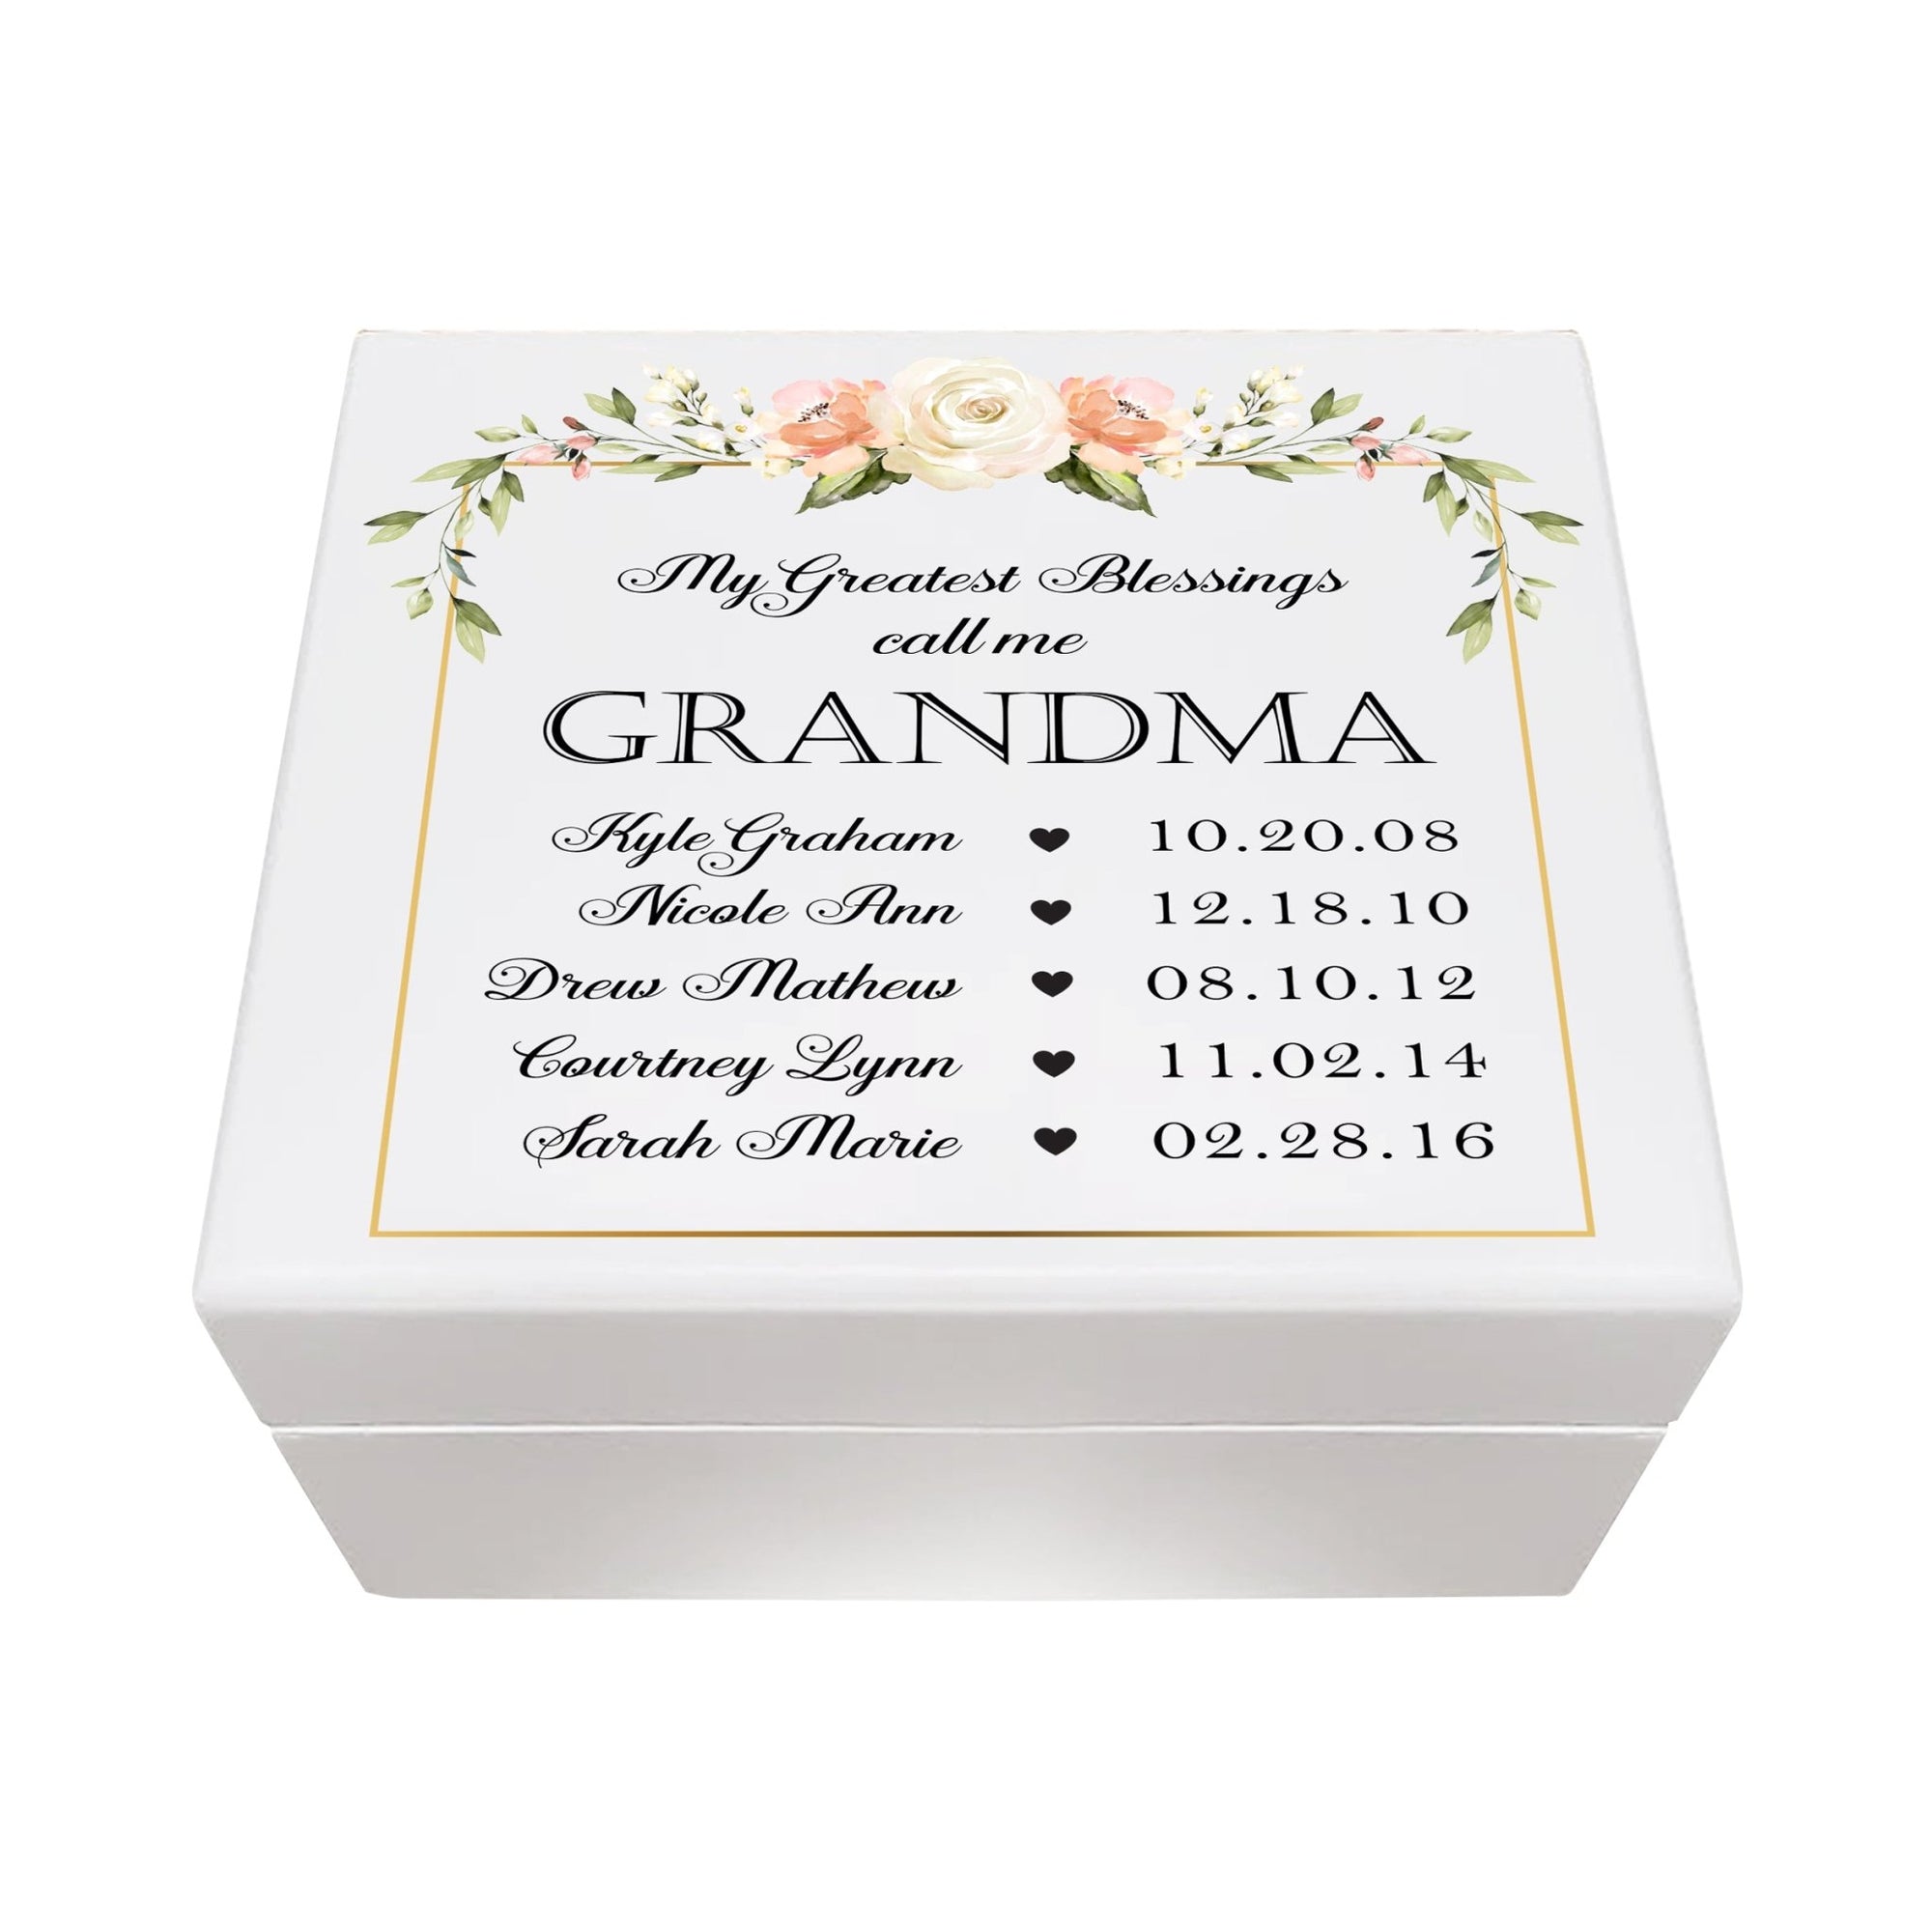 Personalized Grandmother’s Keepsake Box - My Greatest Blessings - LifeSong Milestones